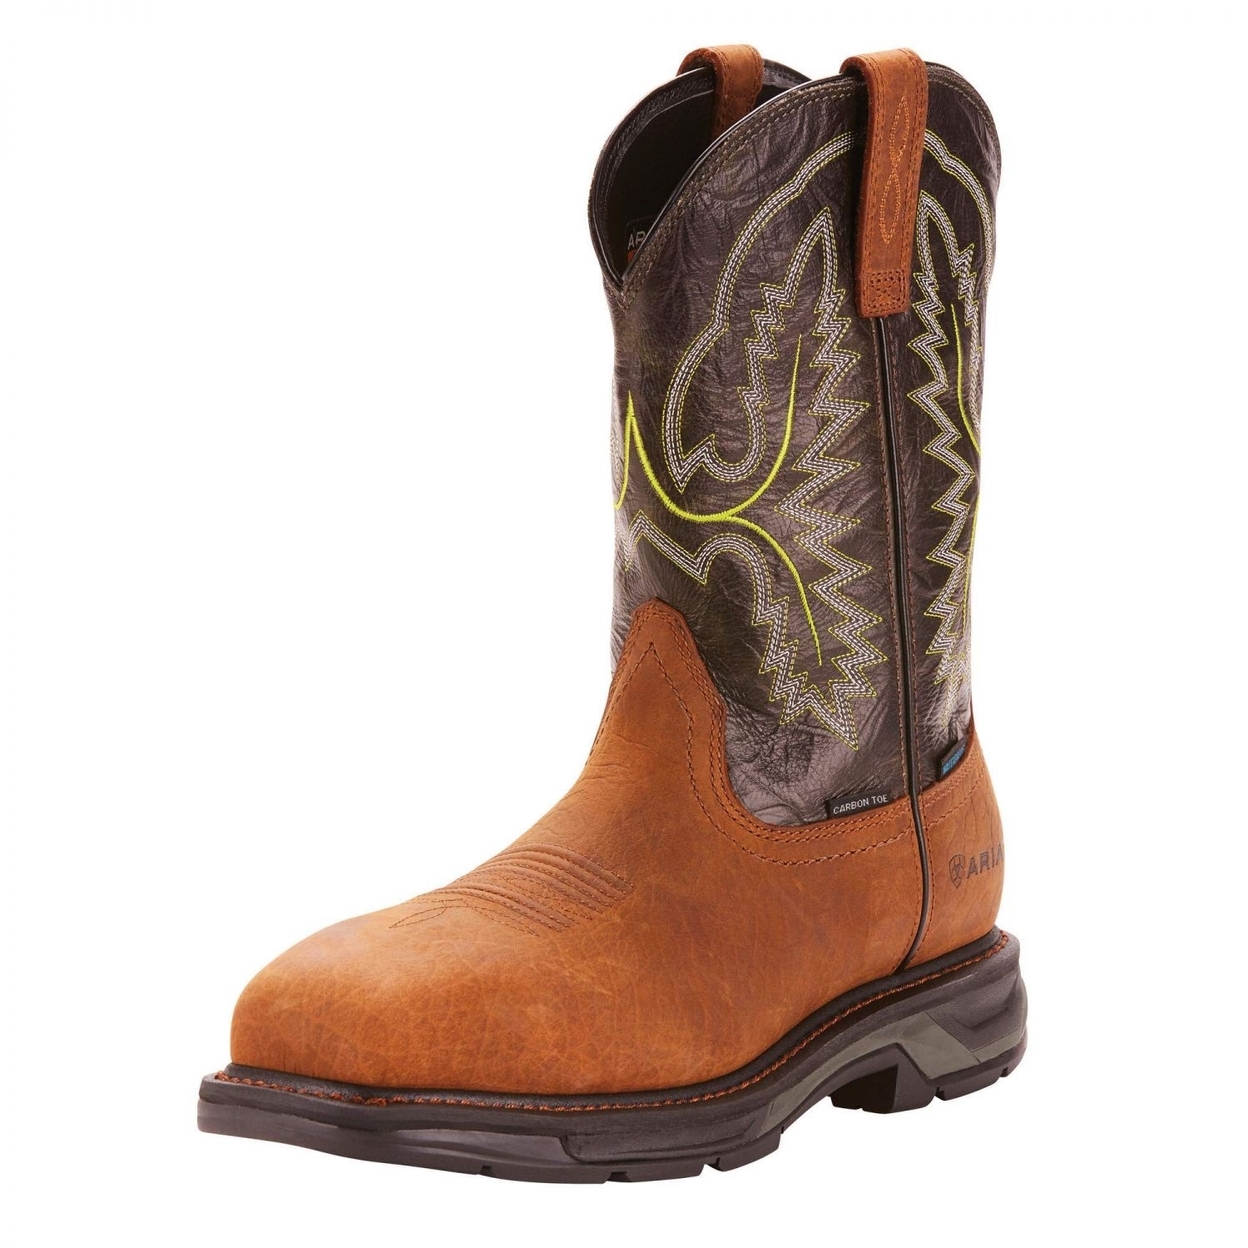 Ariat Work Men's Workhog XT H2O Carbon Toe Western Boot ONE SIZE BRK/ FOREST - BRK/ FOREST, 14-D